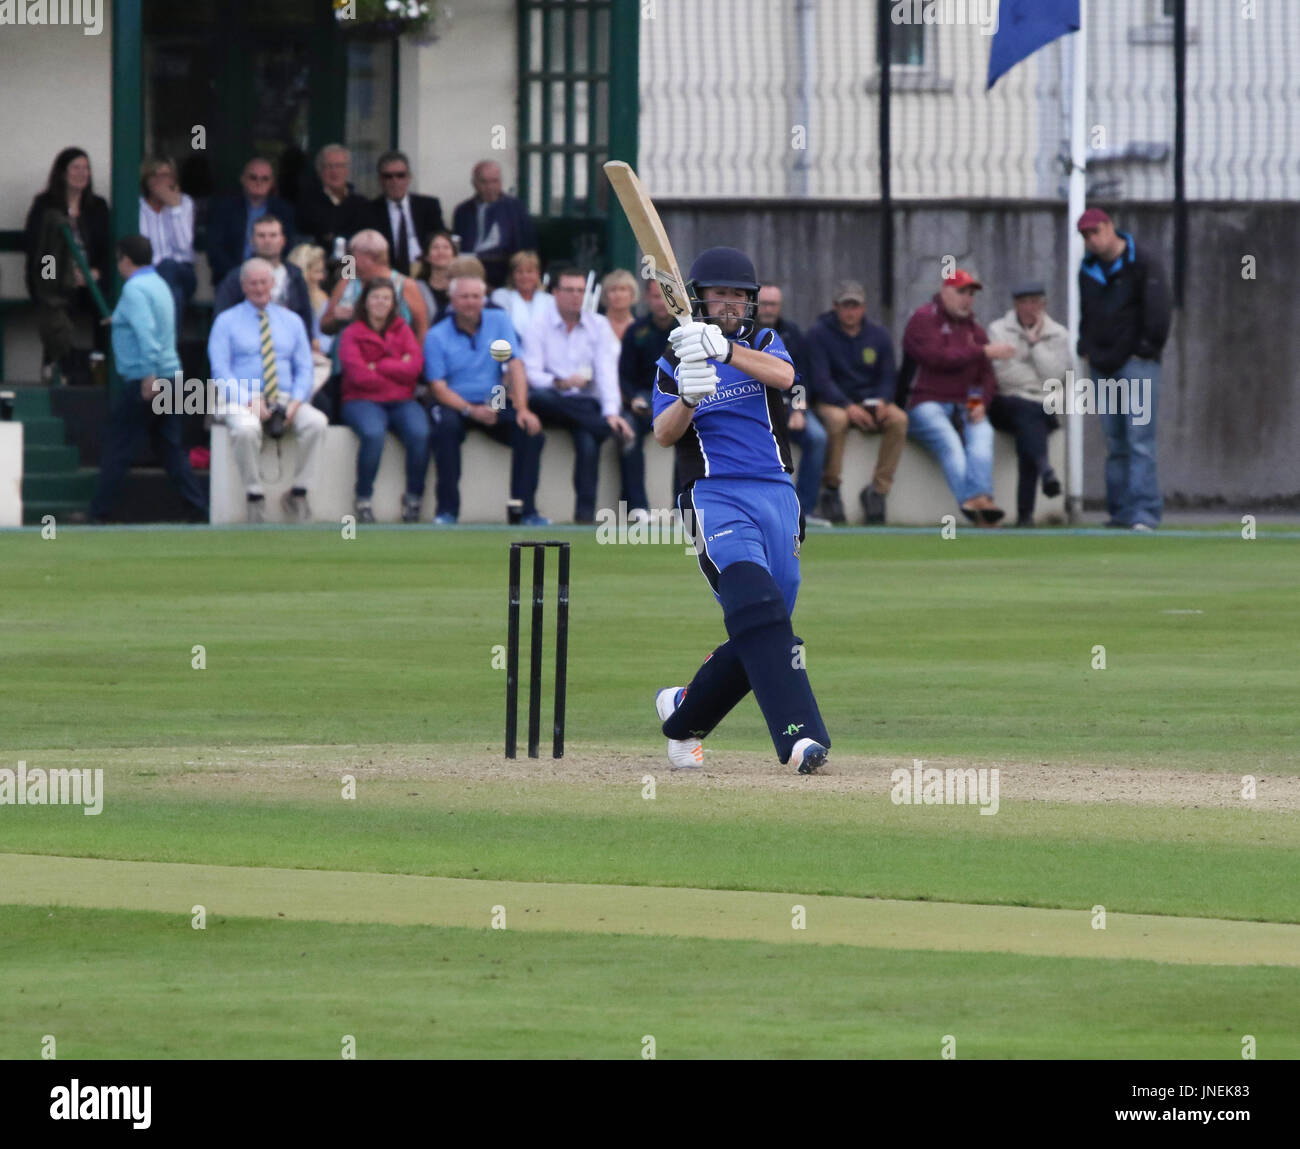 The Green, Comber, Northern Ireland, UK. 29 July 2017. CIYMS defeated Instonians by six wickets to win the Arthur J Gallagher Cup Final. CIYMS batsman Ryan Hunter pulls another shot to the boundary on his way to 65 not out. Credit: David Hunter/Alamy Live News. Stock Photo